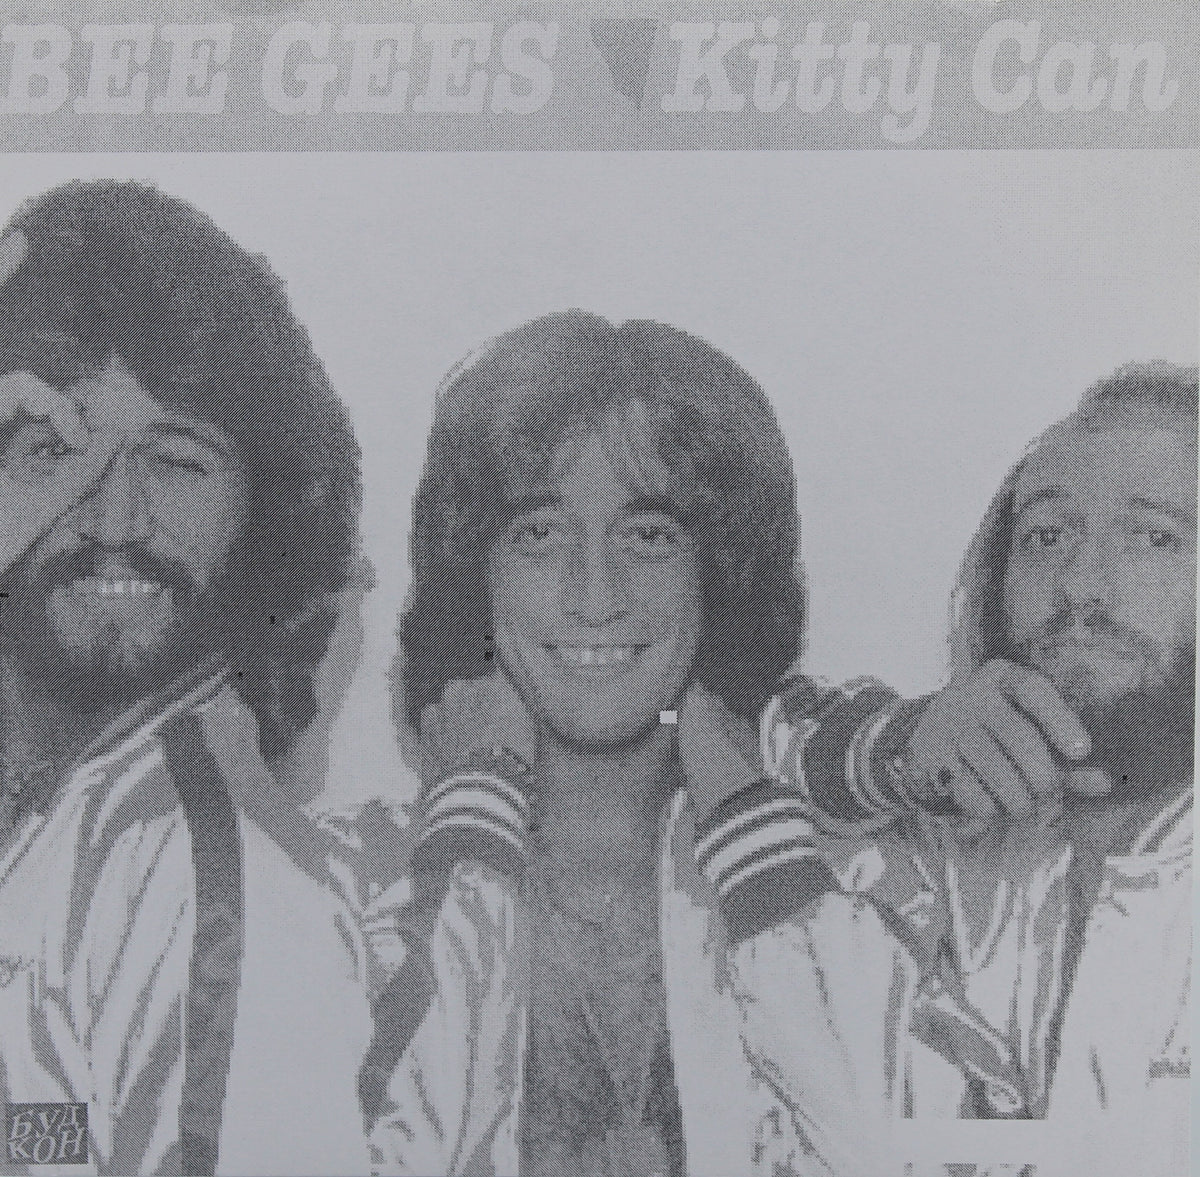 Bee Gees - Kitty Can, Flexi-disc, 5½&quot;, 45 RPM, Single Sided, Unofficial Release, Russia